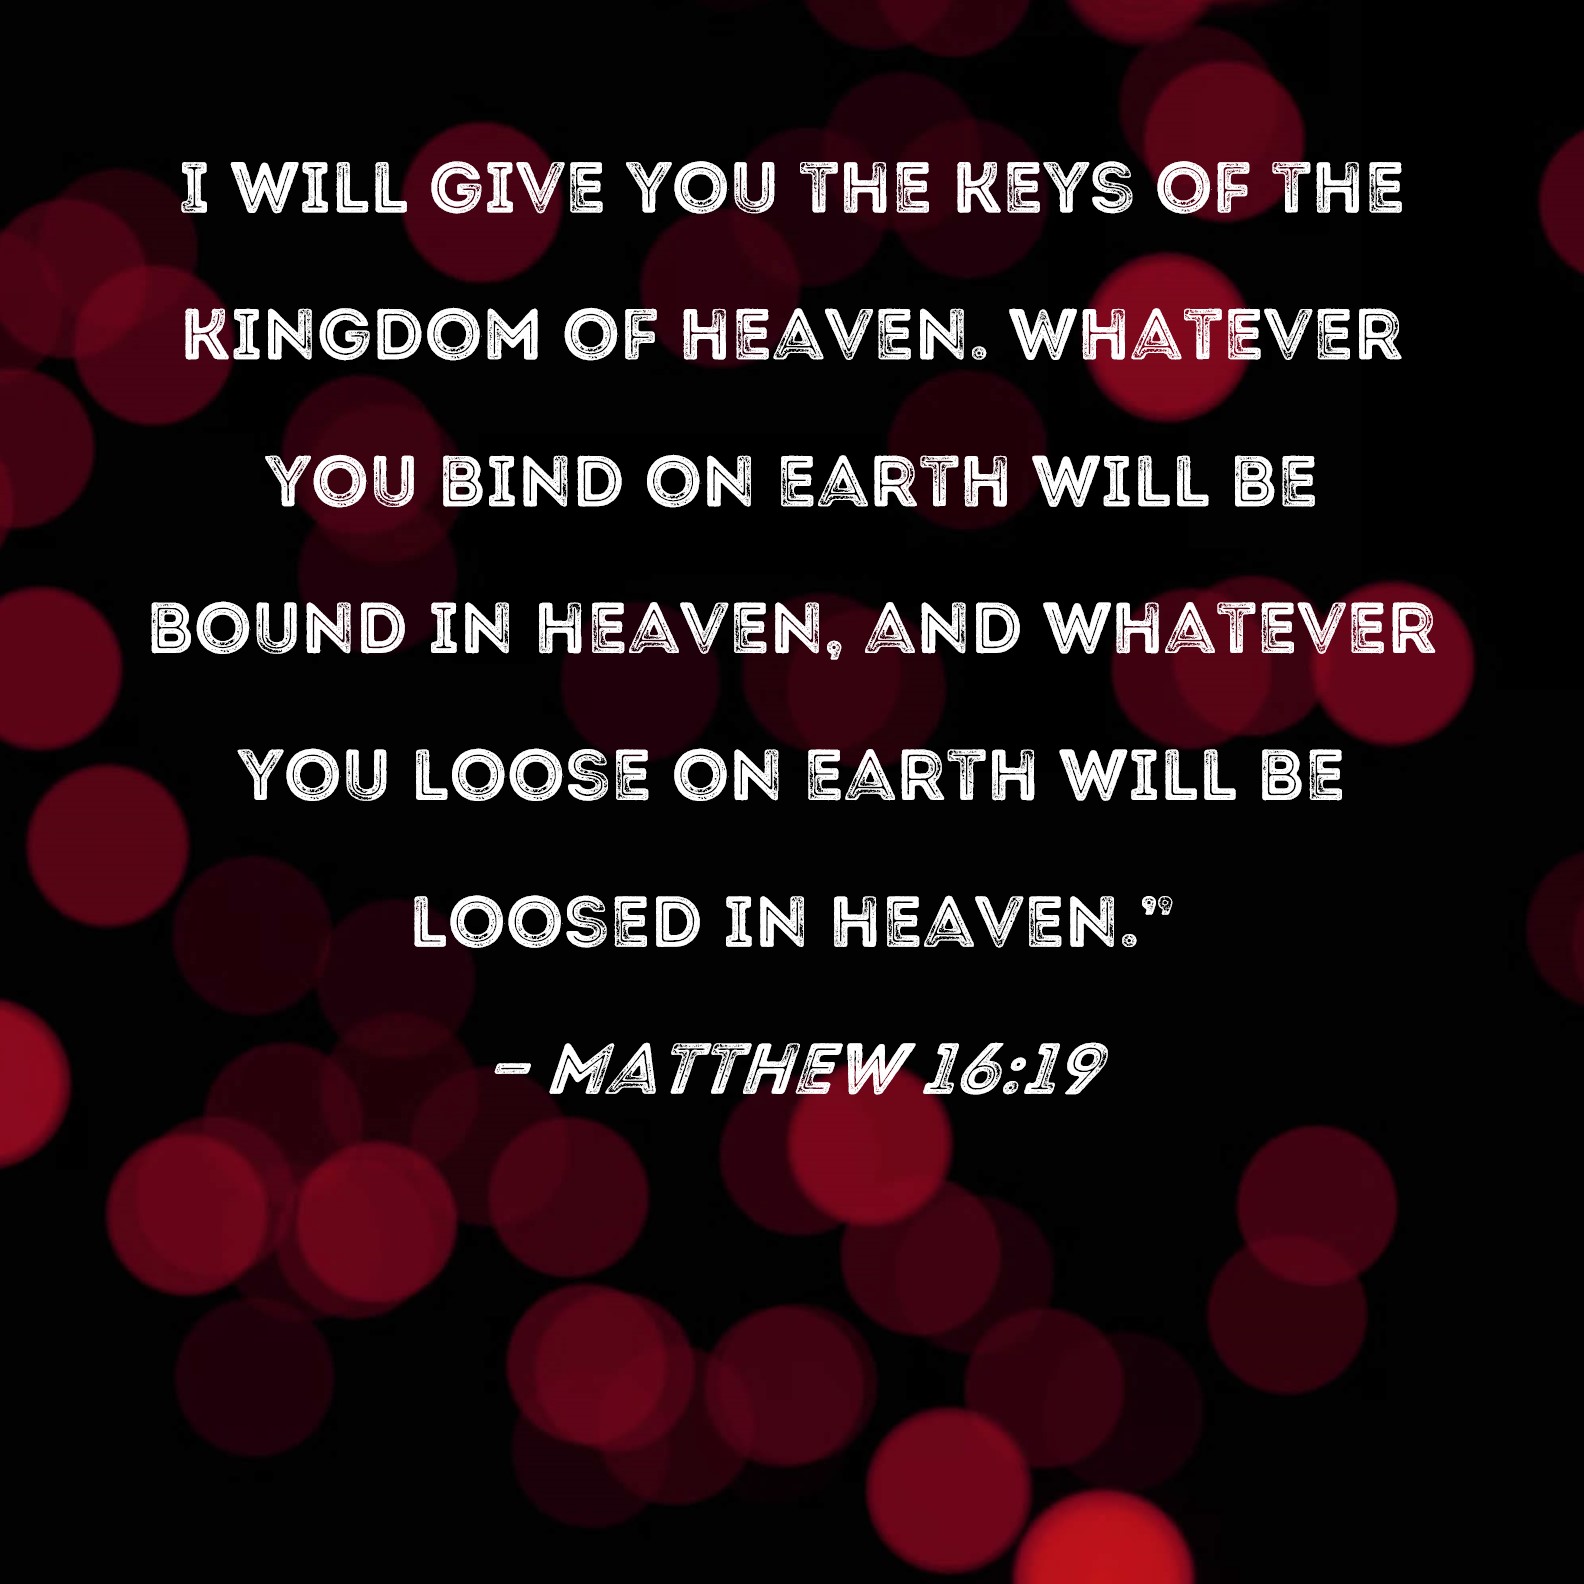 What Does it Mean We Will Be Given the Keys to the Kingdom? (Matthew 16:19)